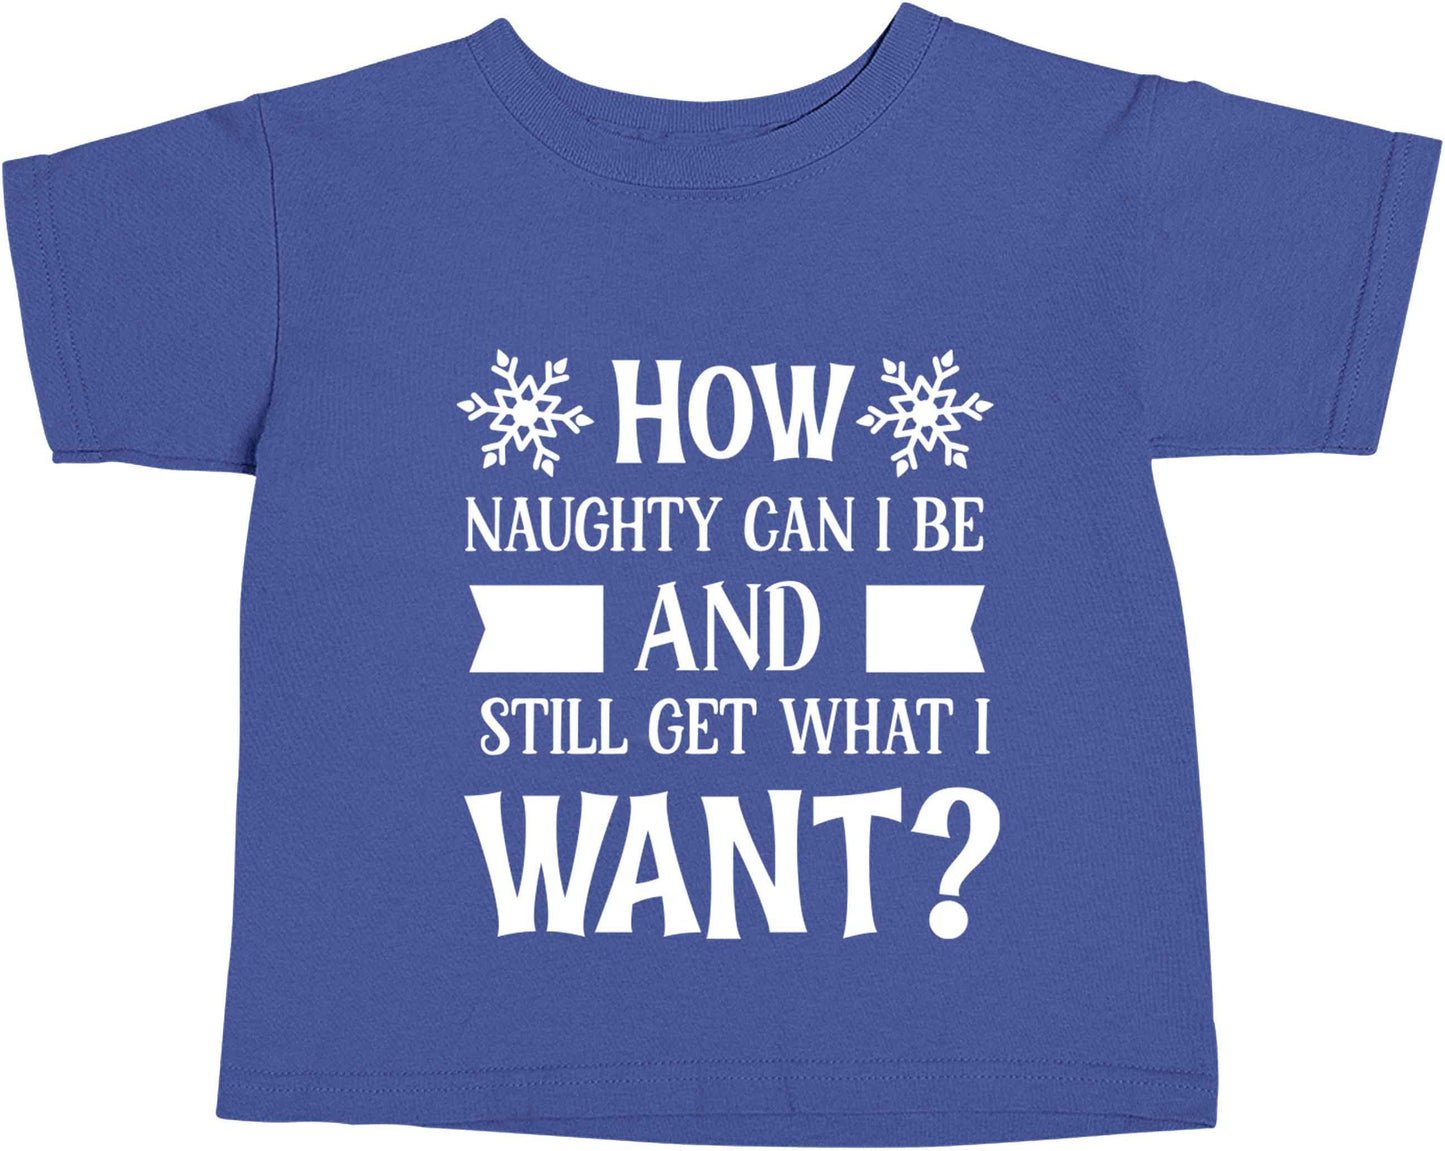 How naughty can I be and still get what I want? blue baby toddler Tshirt 2 Years